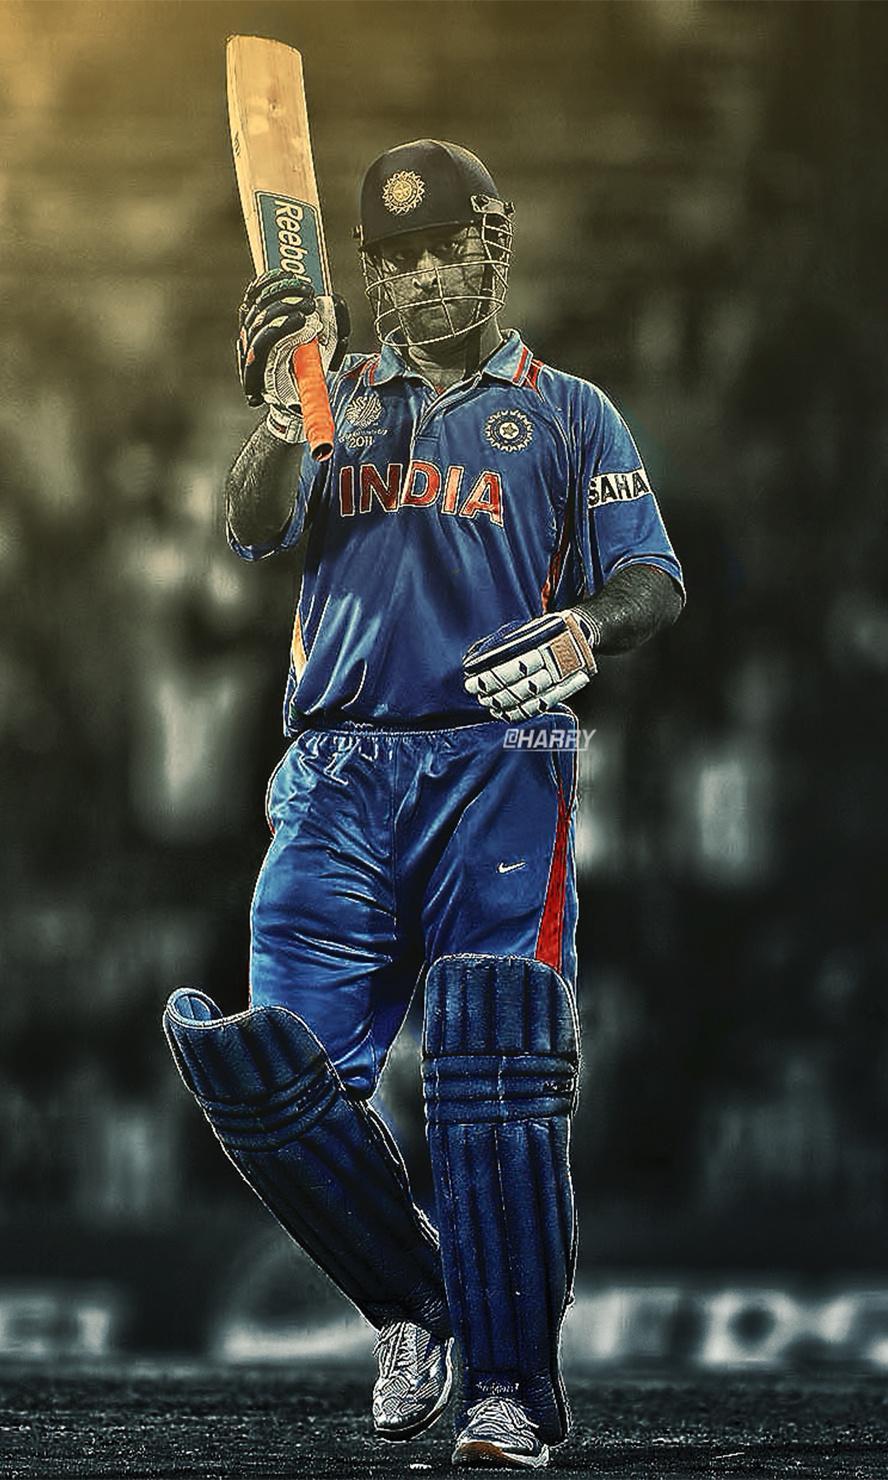 M S Dhoni 07 Hd Mobile Wallpapers Hd Images 2 MobileWallpaper Wallpaper